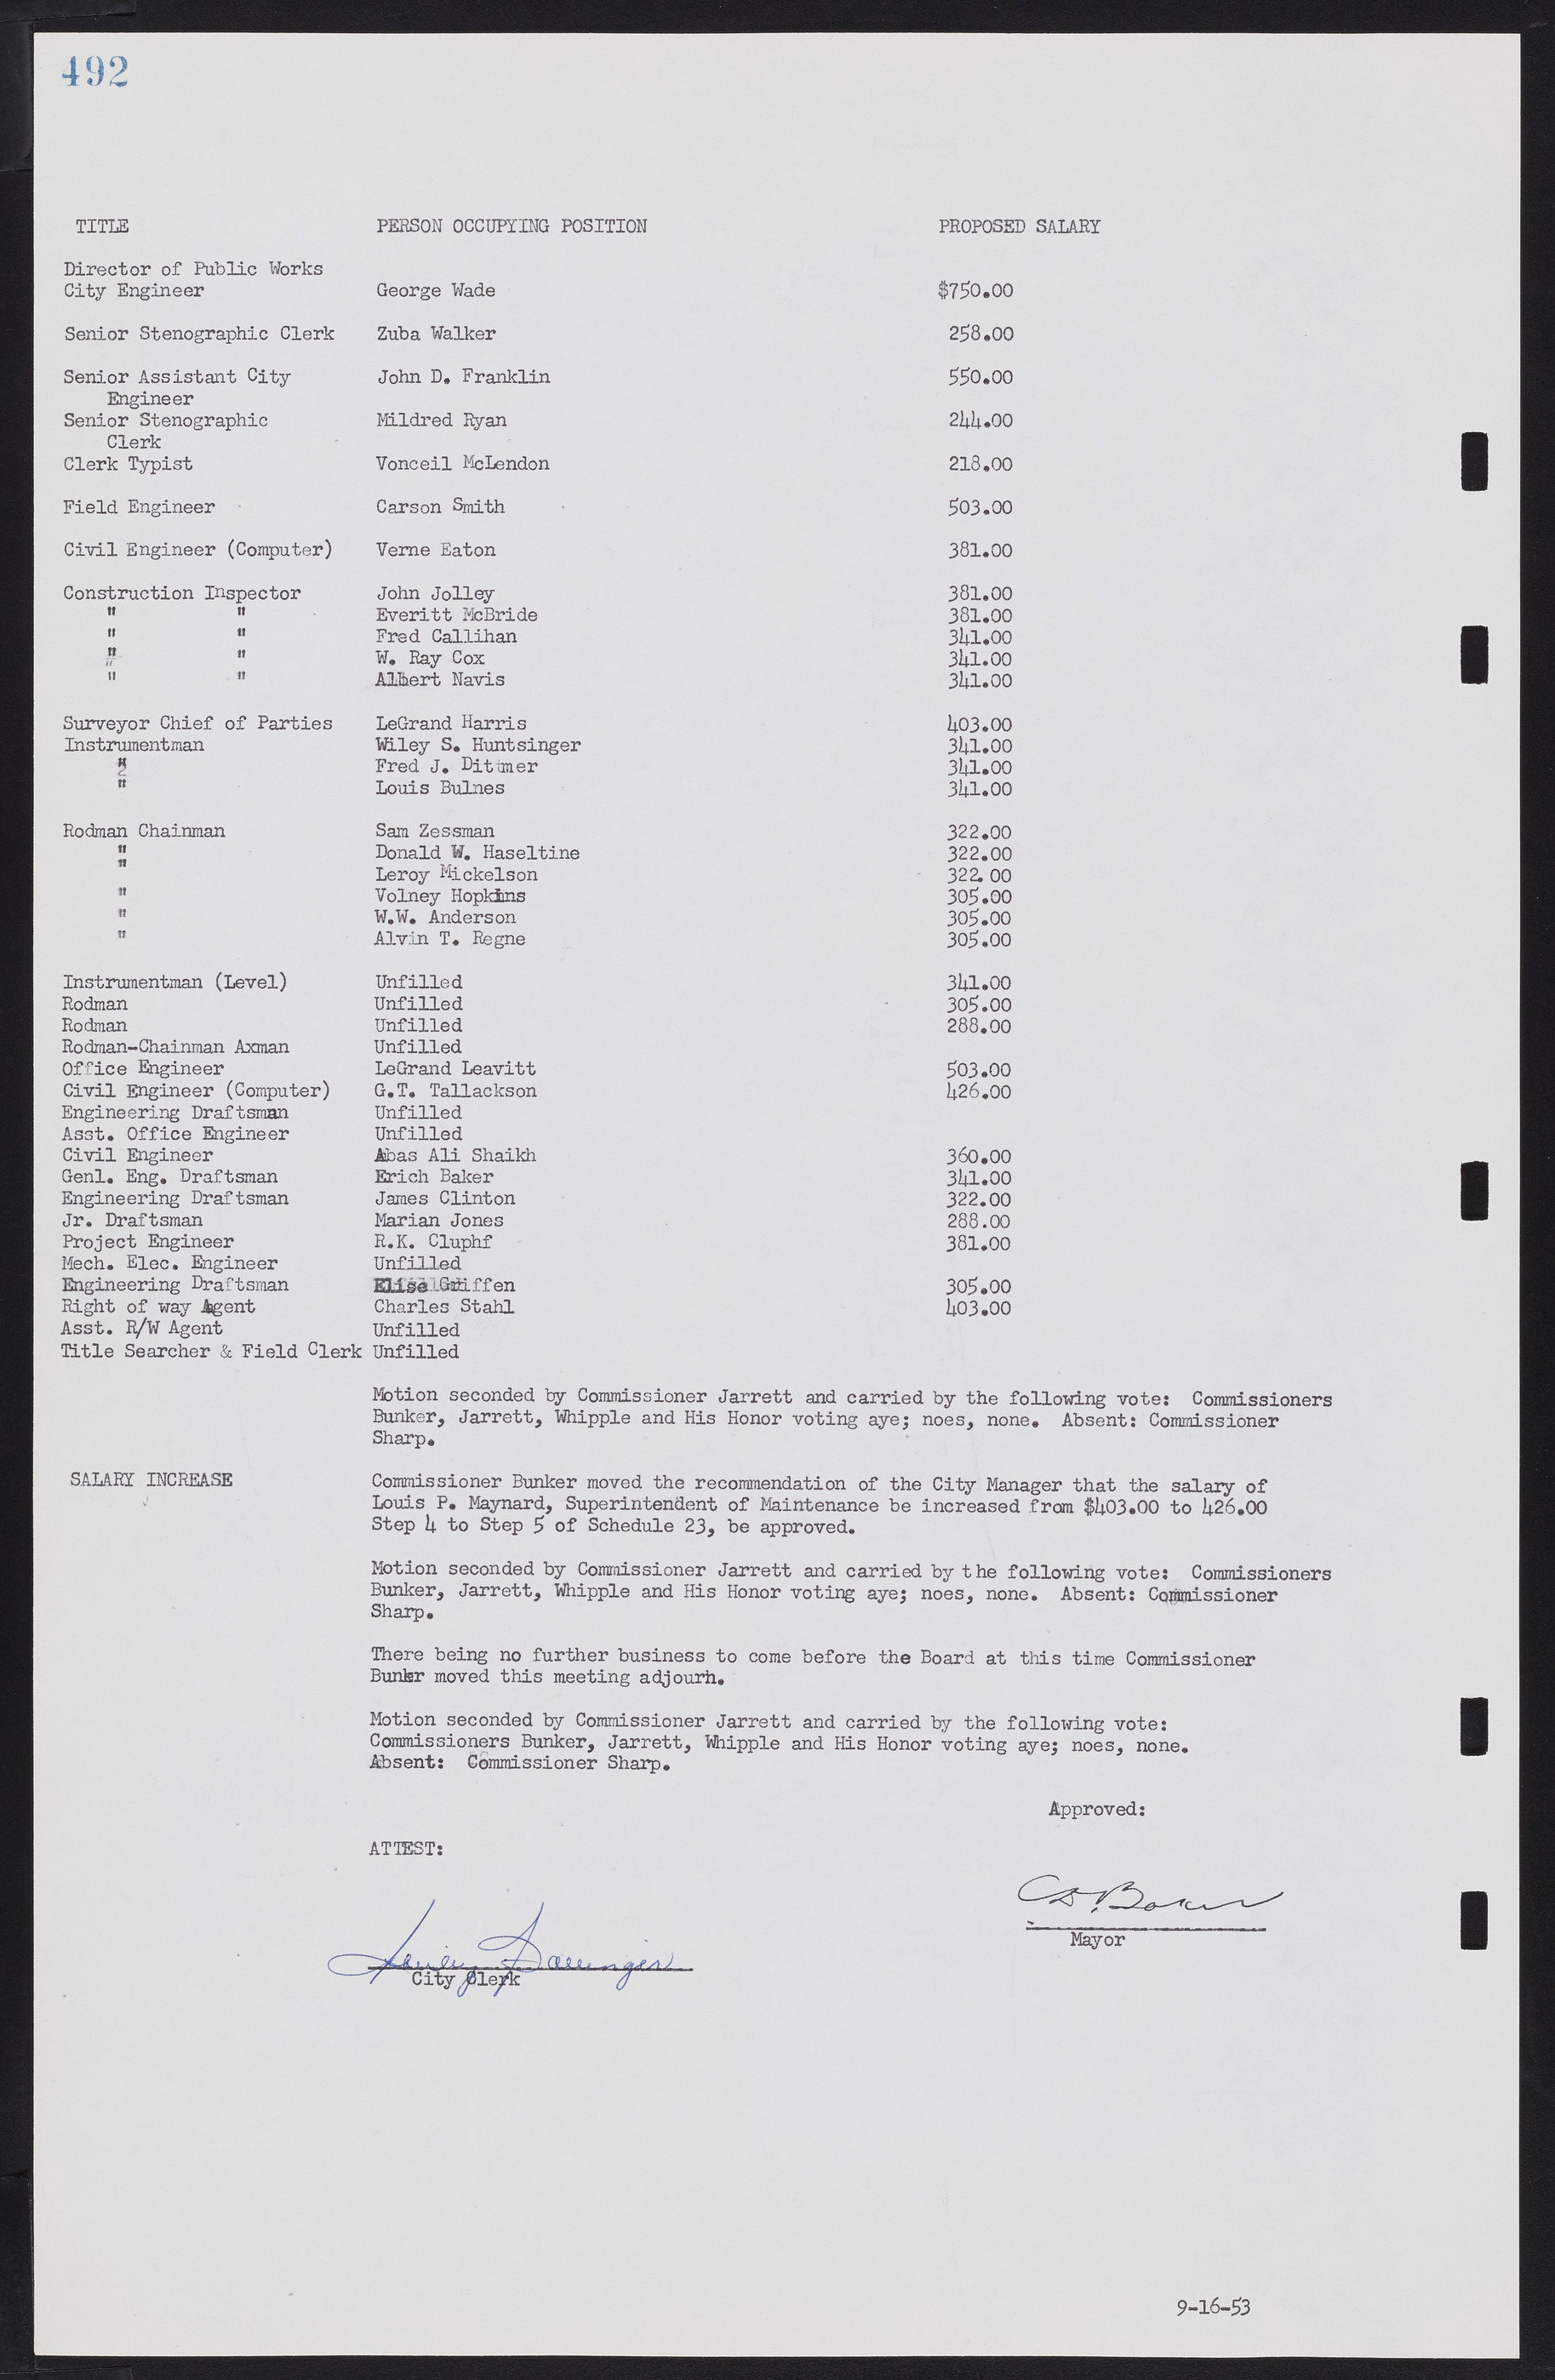 Las Vegas City Commission Minutes, May 26, 1952 to February 17, 1954, lvc000008-522